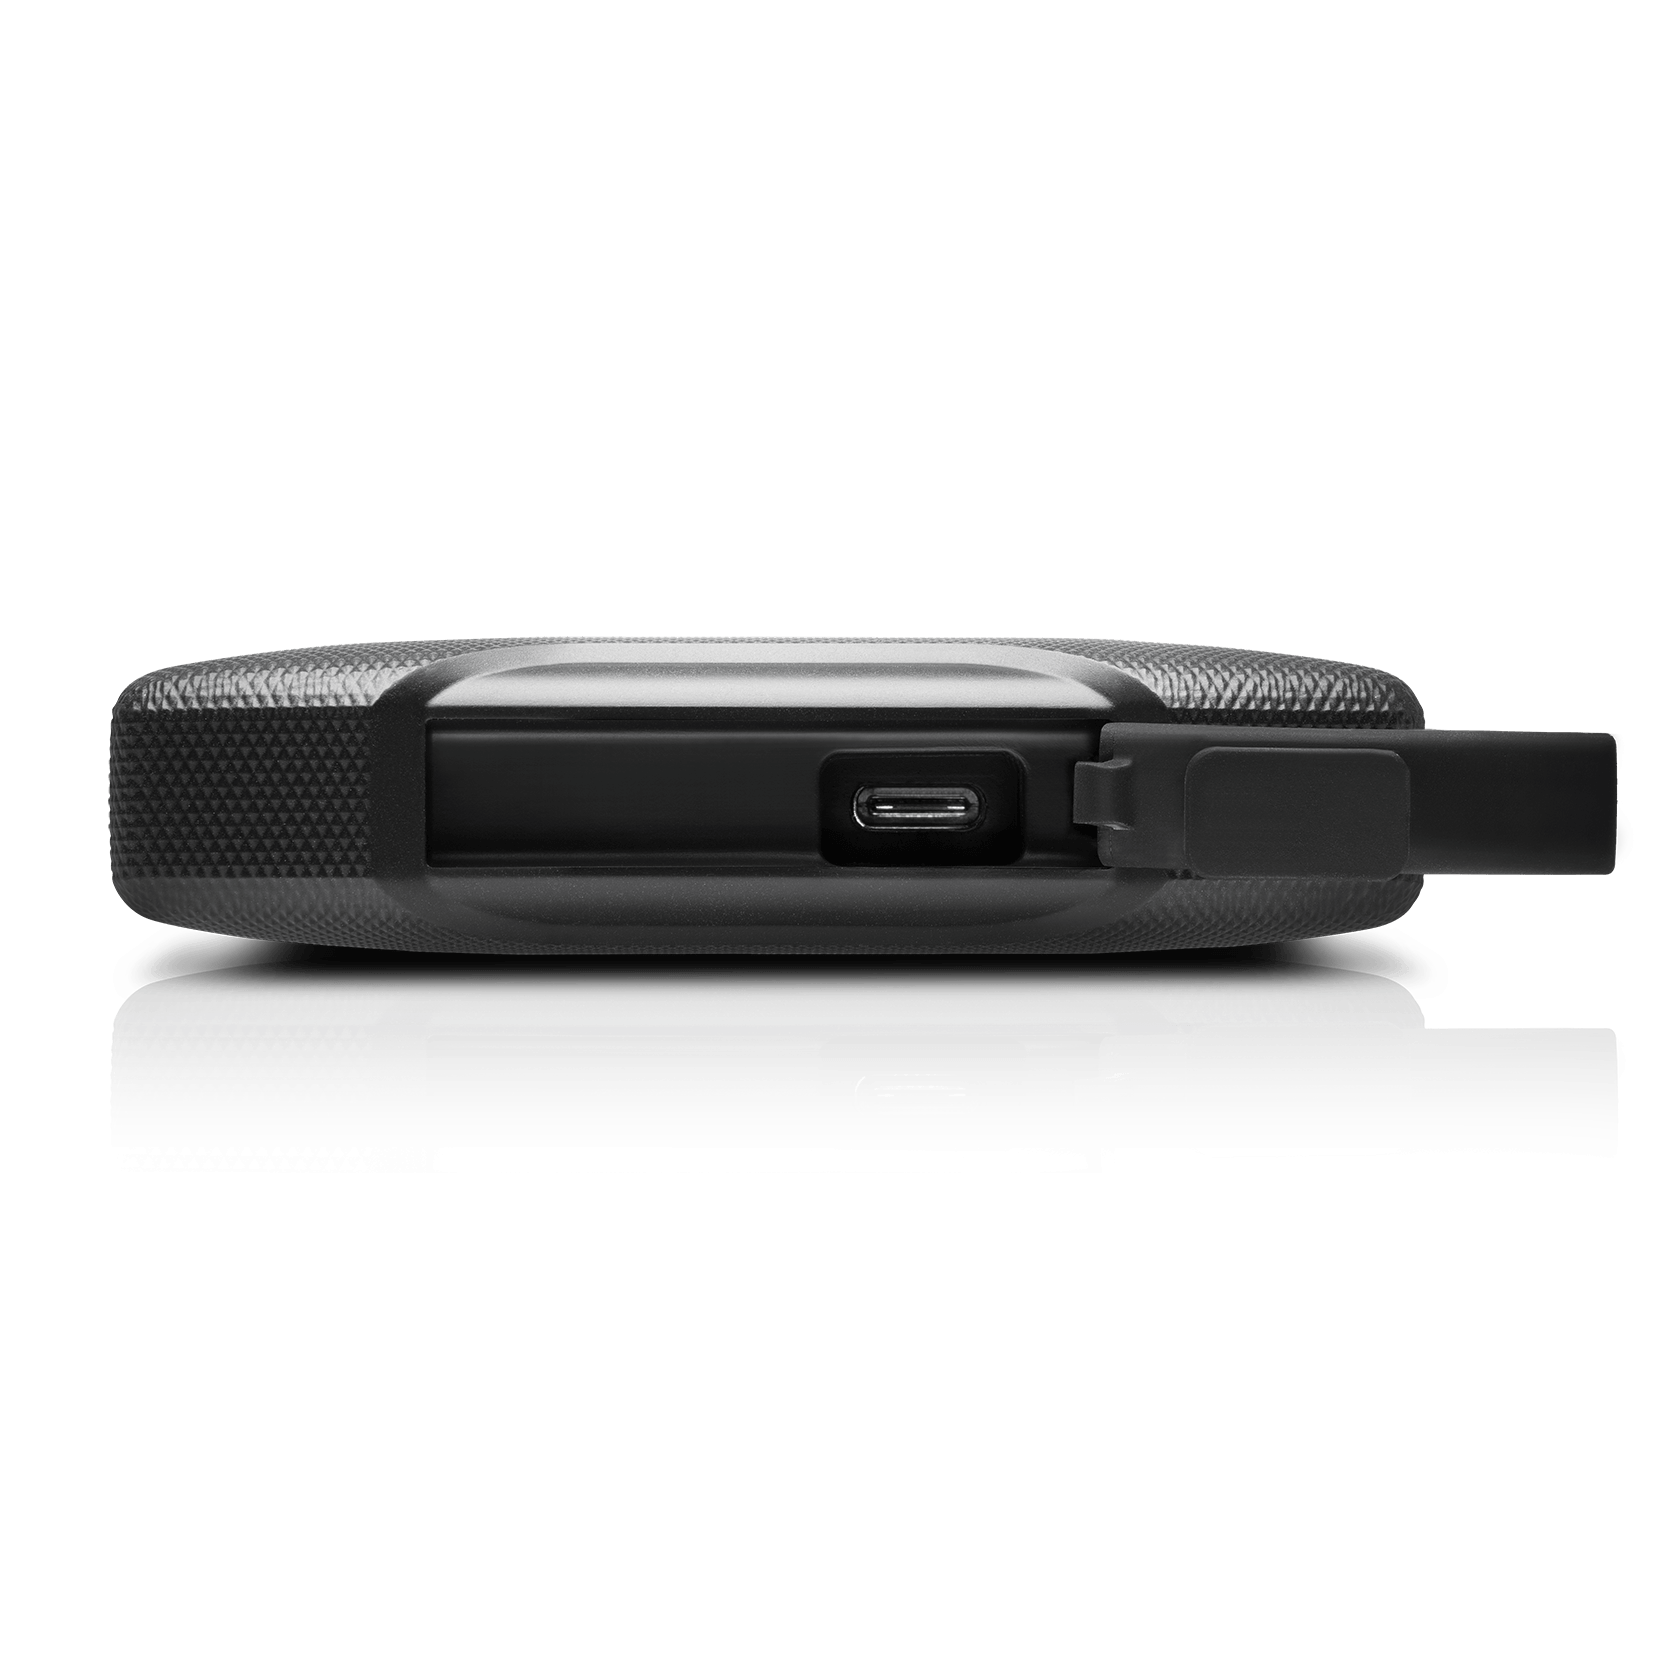 SanDisk Professional 1TB G-DRIVE ArmorATD, Portable External Hard Drive - SDPH81G-001T-GBAND - image 4 of 5